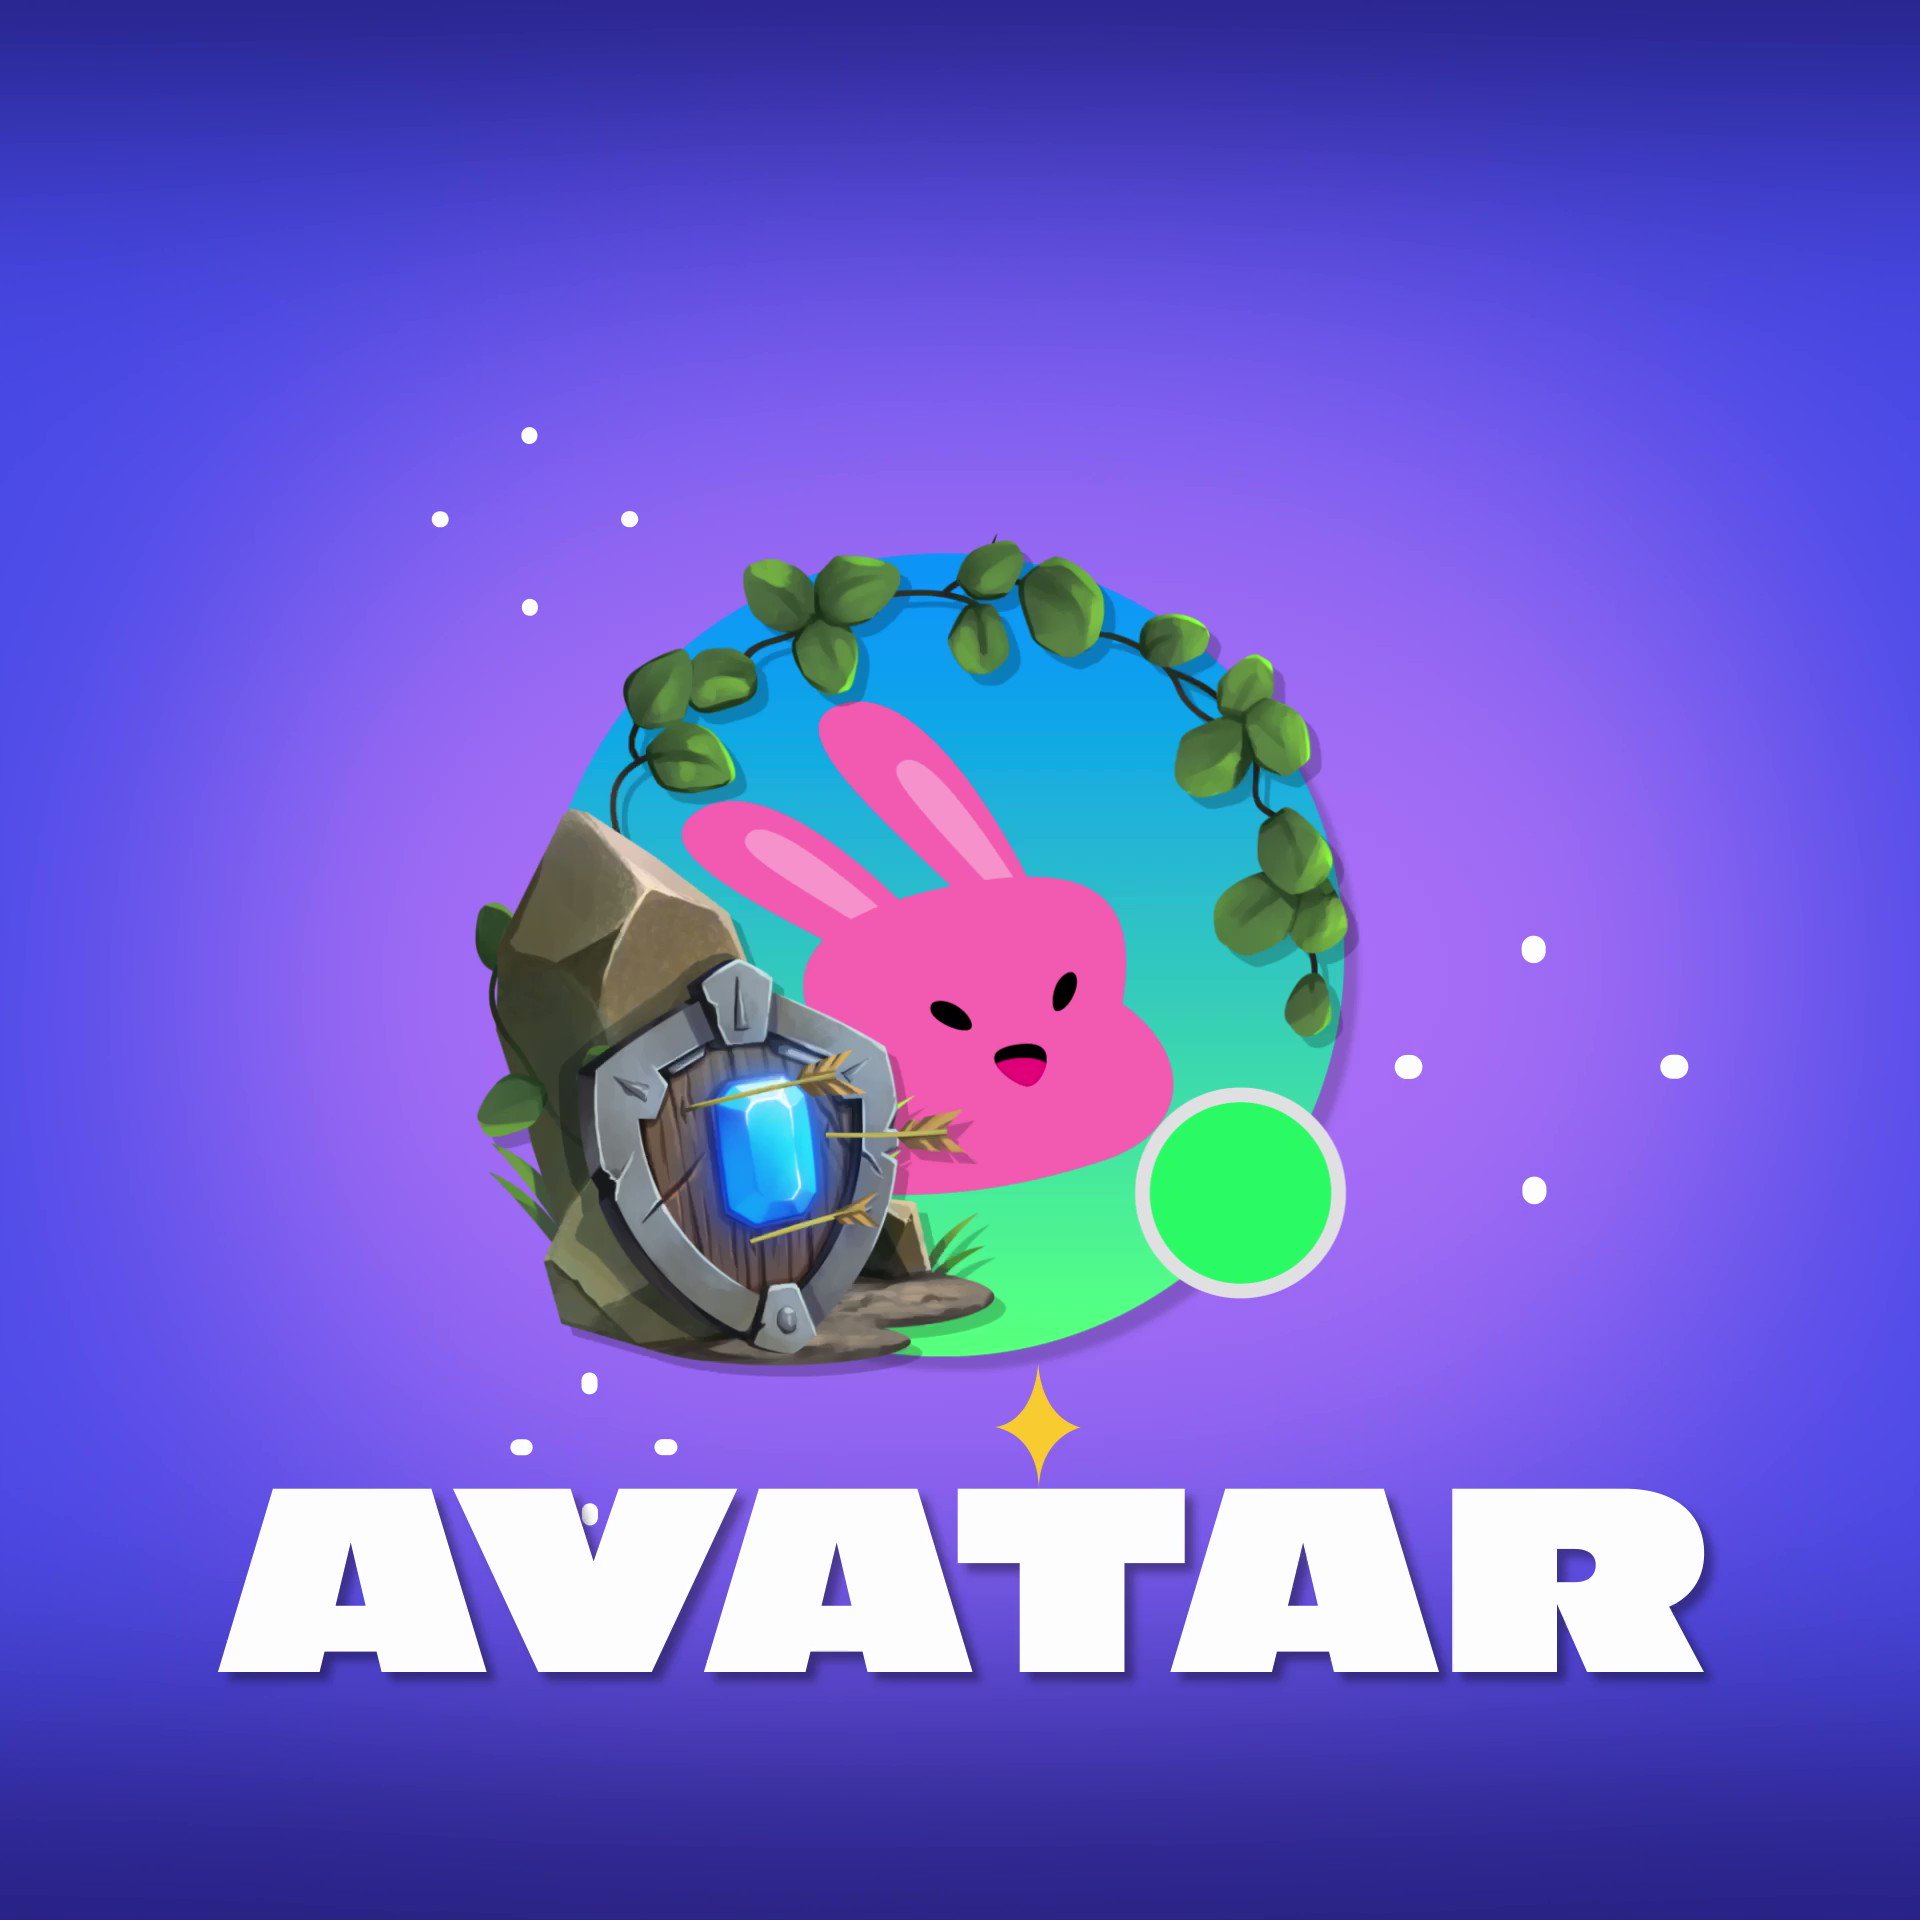 Avatar Decorations & Profile Effects: Collect and Keep the Newest